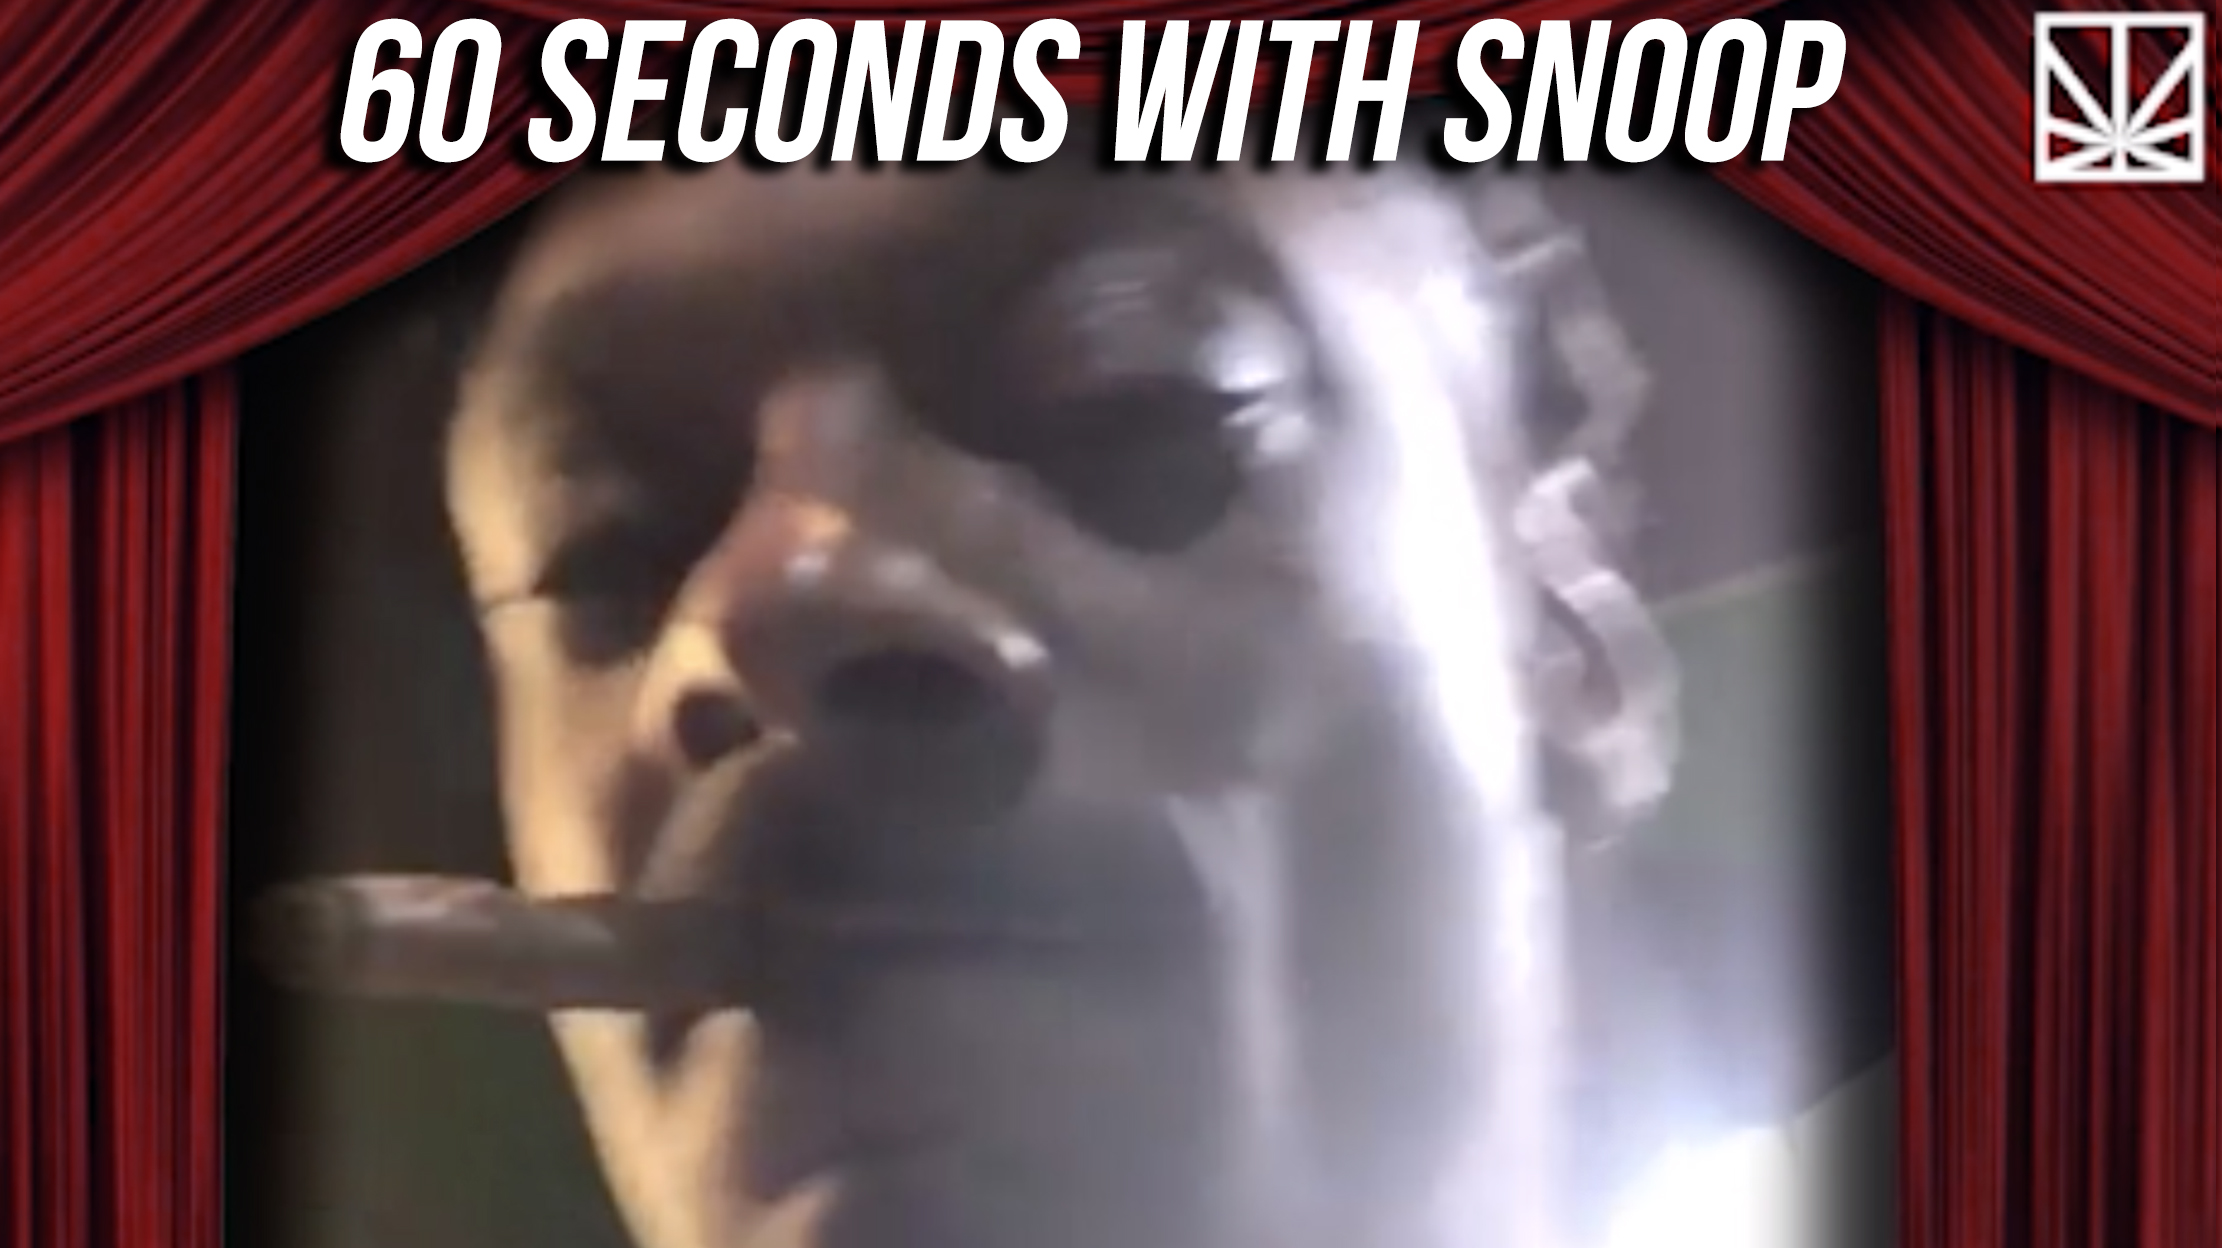 What has Uncle Snoop Been Up To? Catch Up with 60 Seconds with Snoop